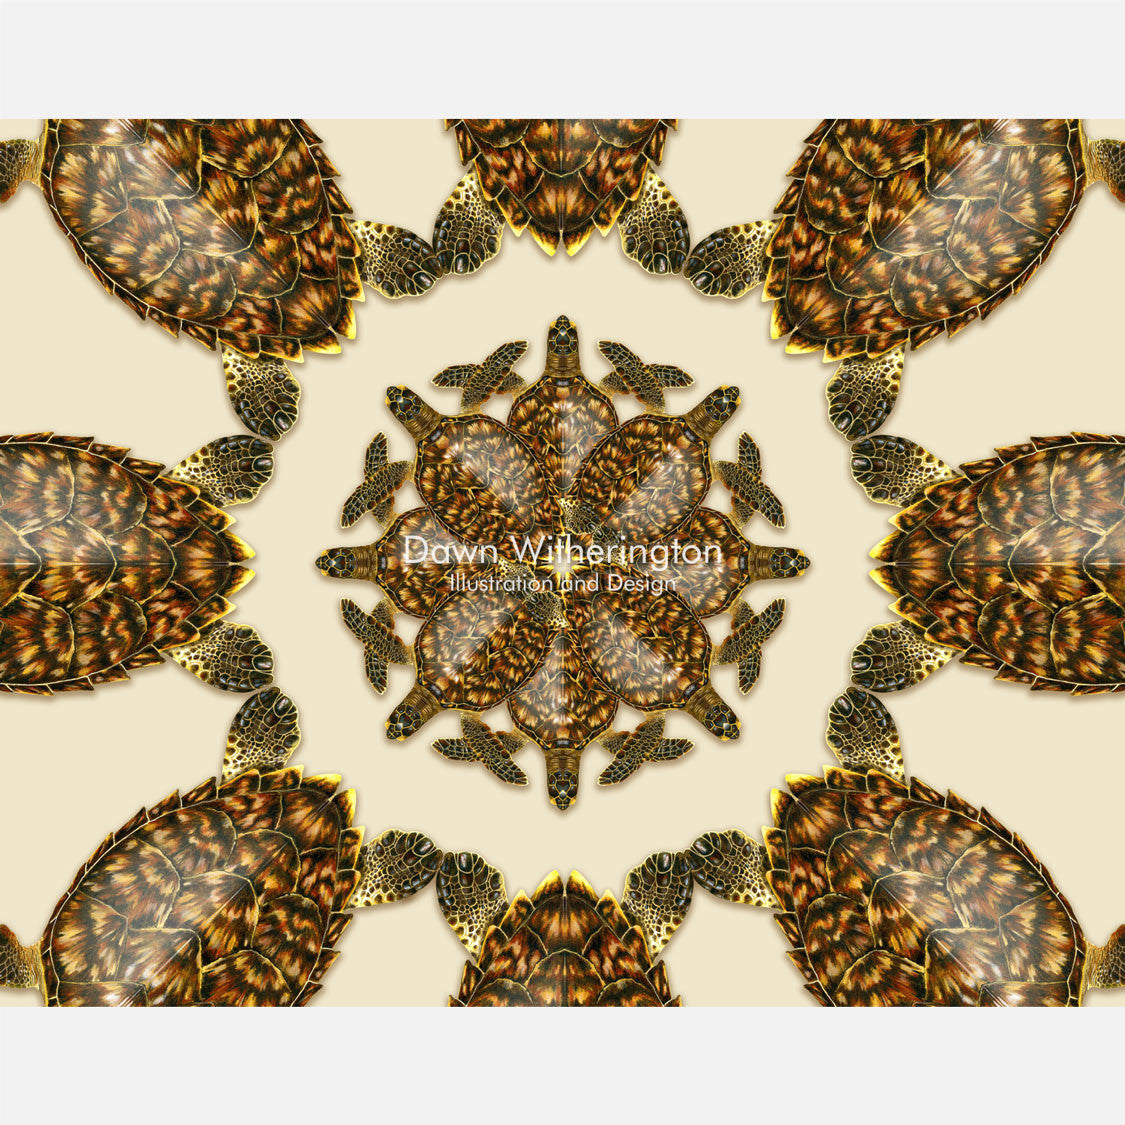 This beautiful design is of a kaleidoscopic graphic of hawksbill sea turtles, Eretmochelys imbricata. 